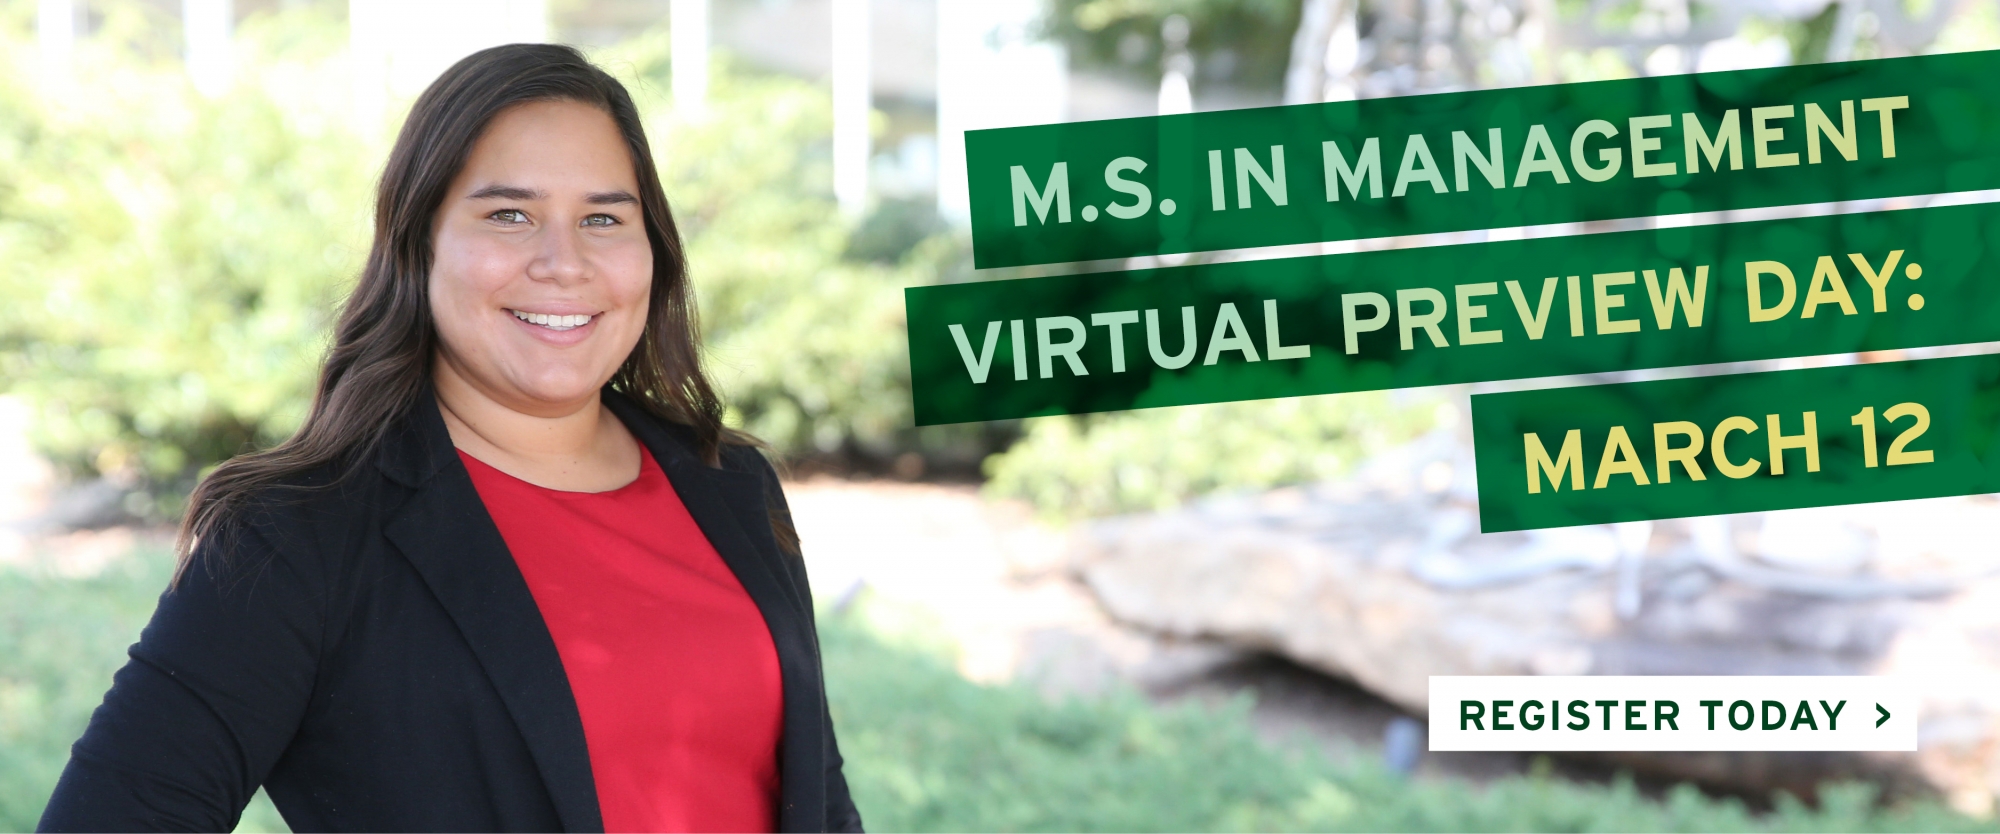 M.S. in Management Virtual Preview Day: March 12